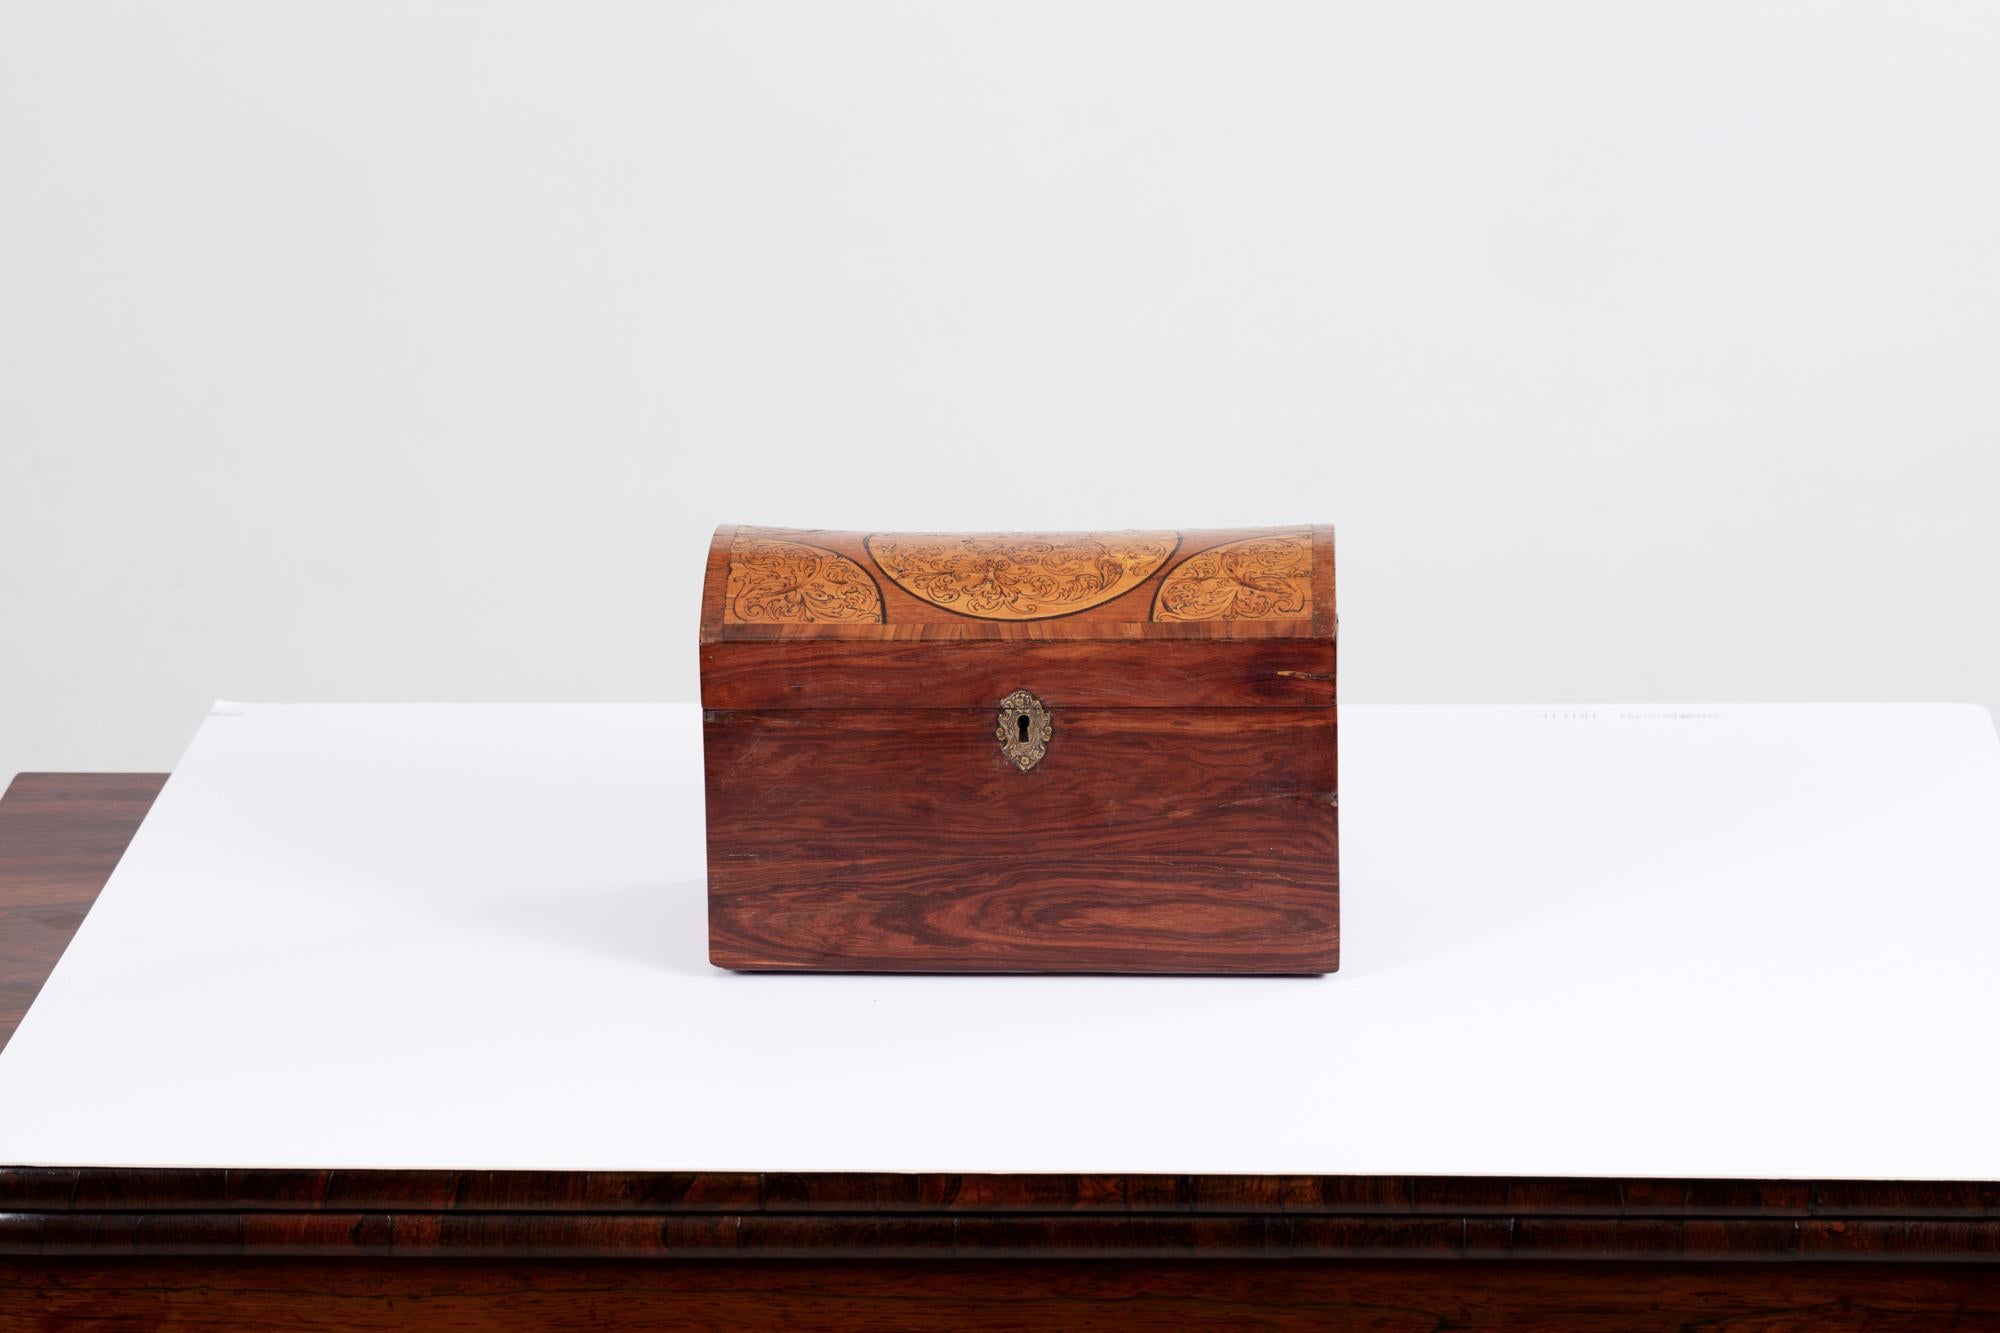 19th Century inlaid dome-top wooden box with acanthus leaf detail, decorative brass lock and secret drawer.